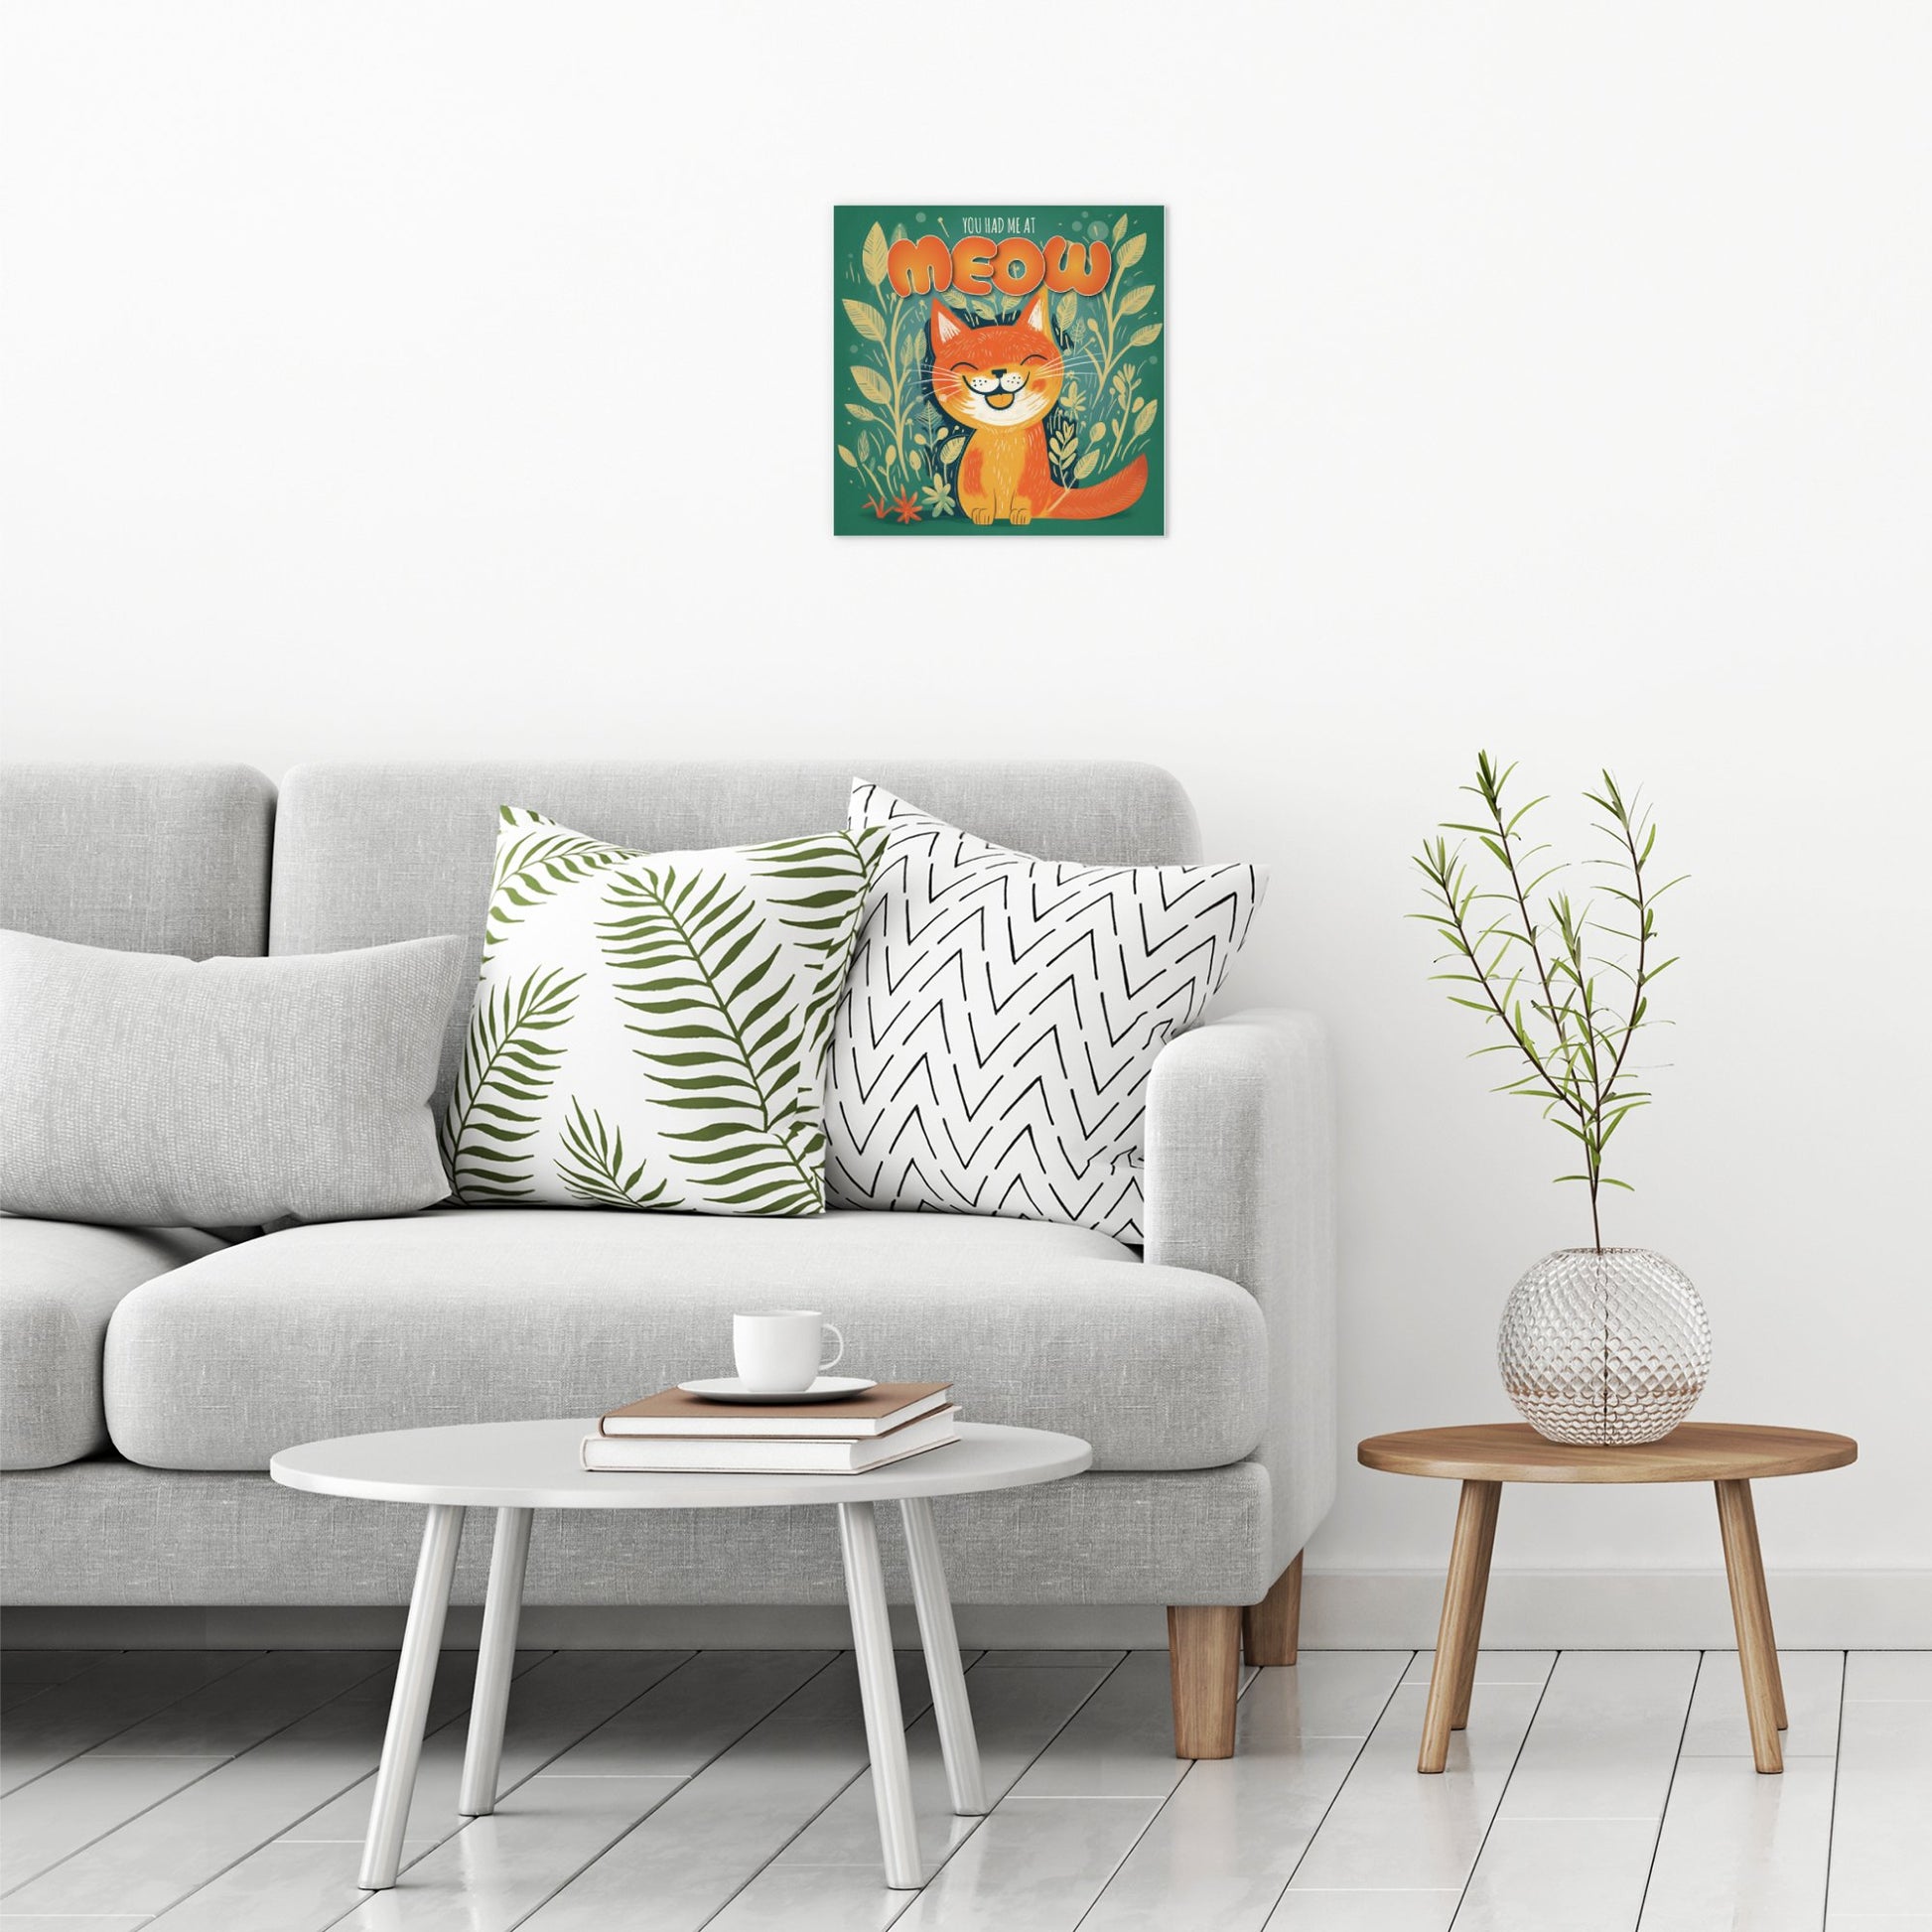 A contemporary modern room view showing a medium size metal art poster display plate with printed design of a You Had Me At Meow - Cute Cat Quote